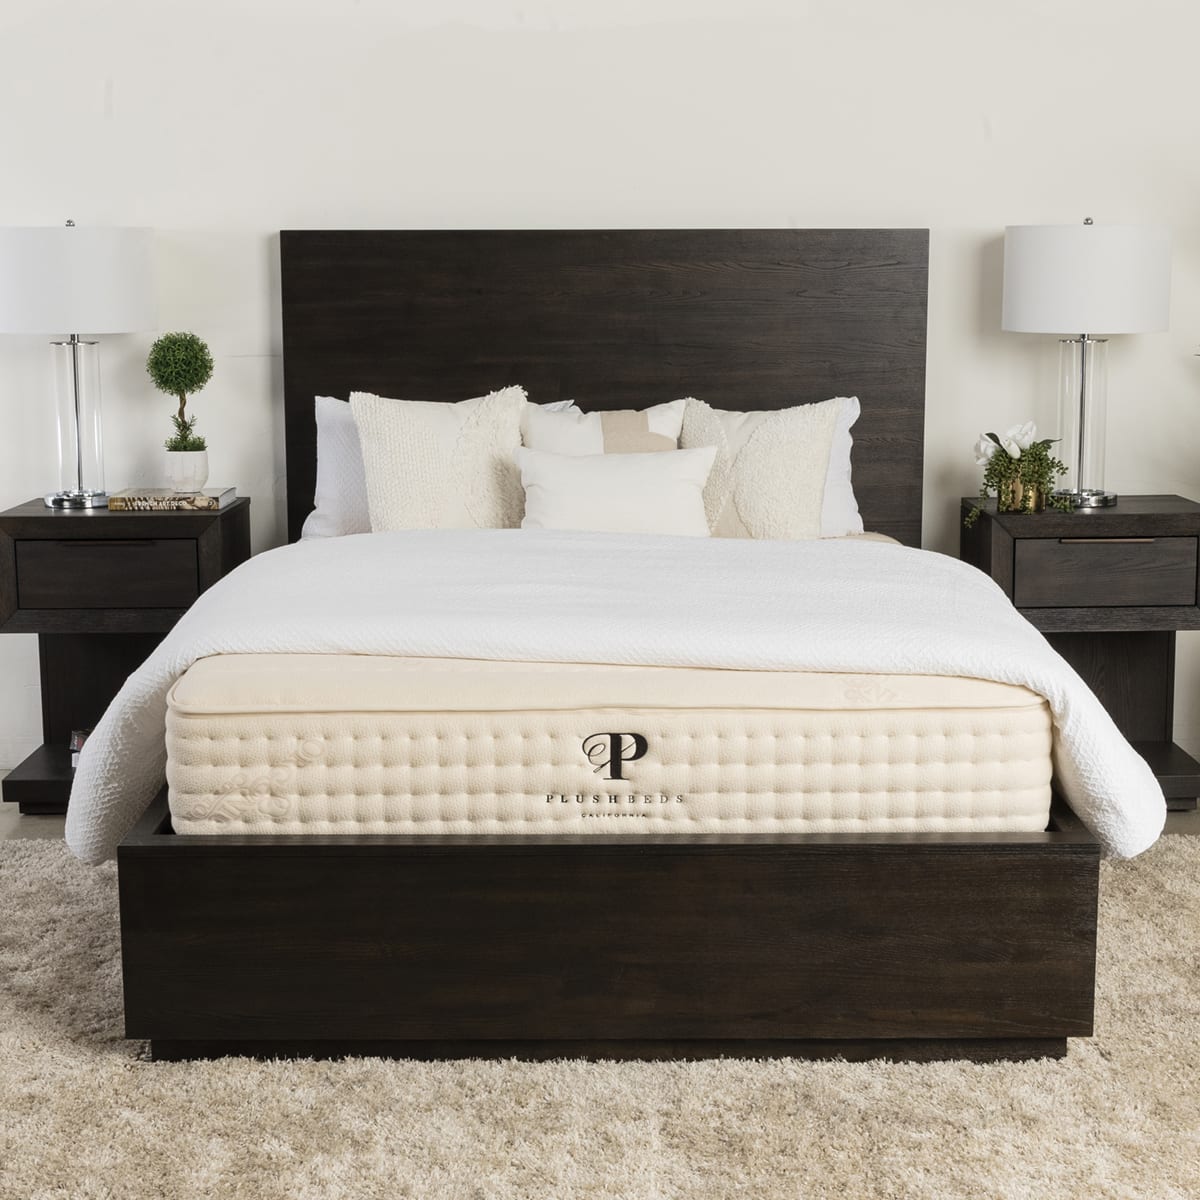 Which Tempur Pedic Base Is Best